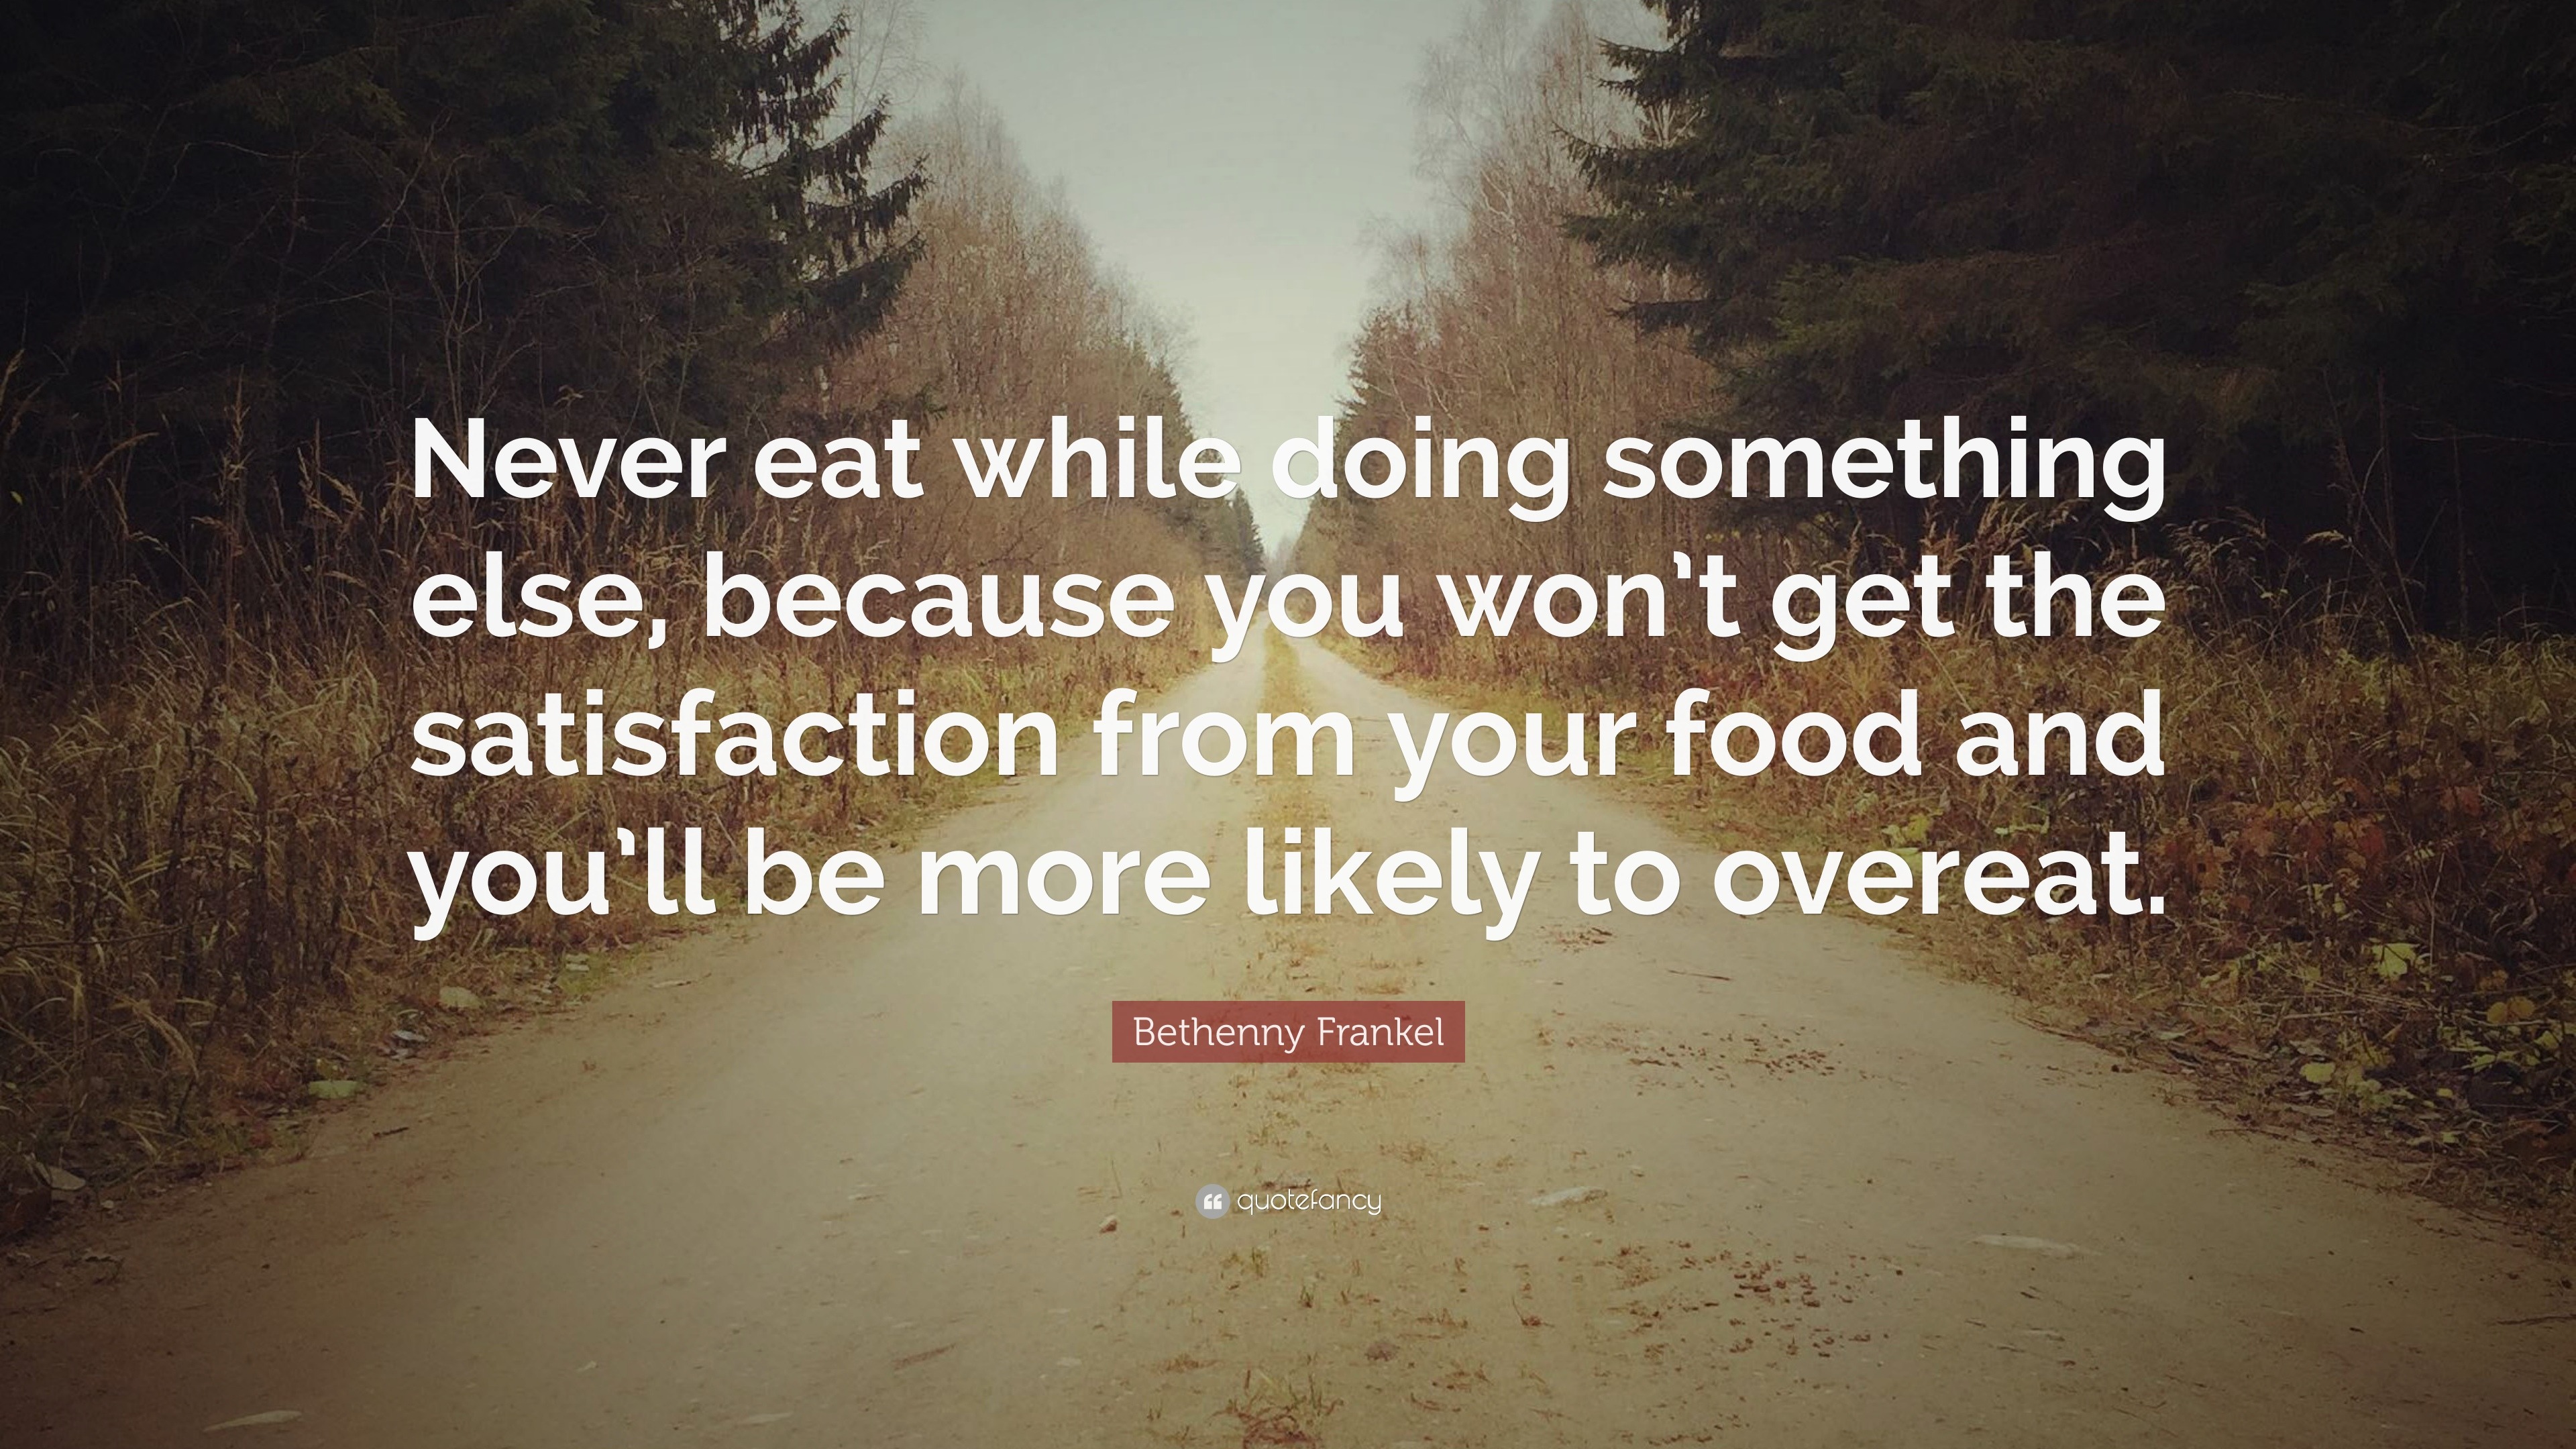 Bethenny Frankel Quote: “Never eat while doing something else, because ...